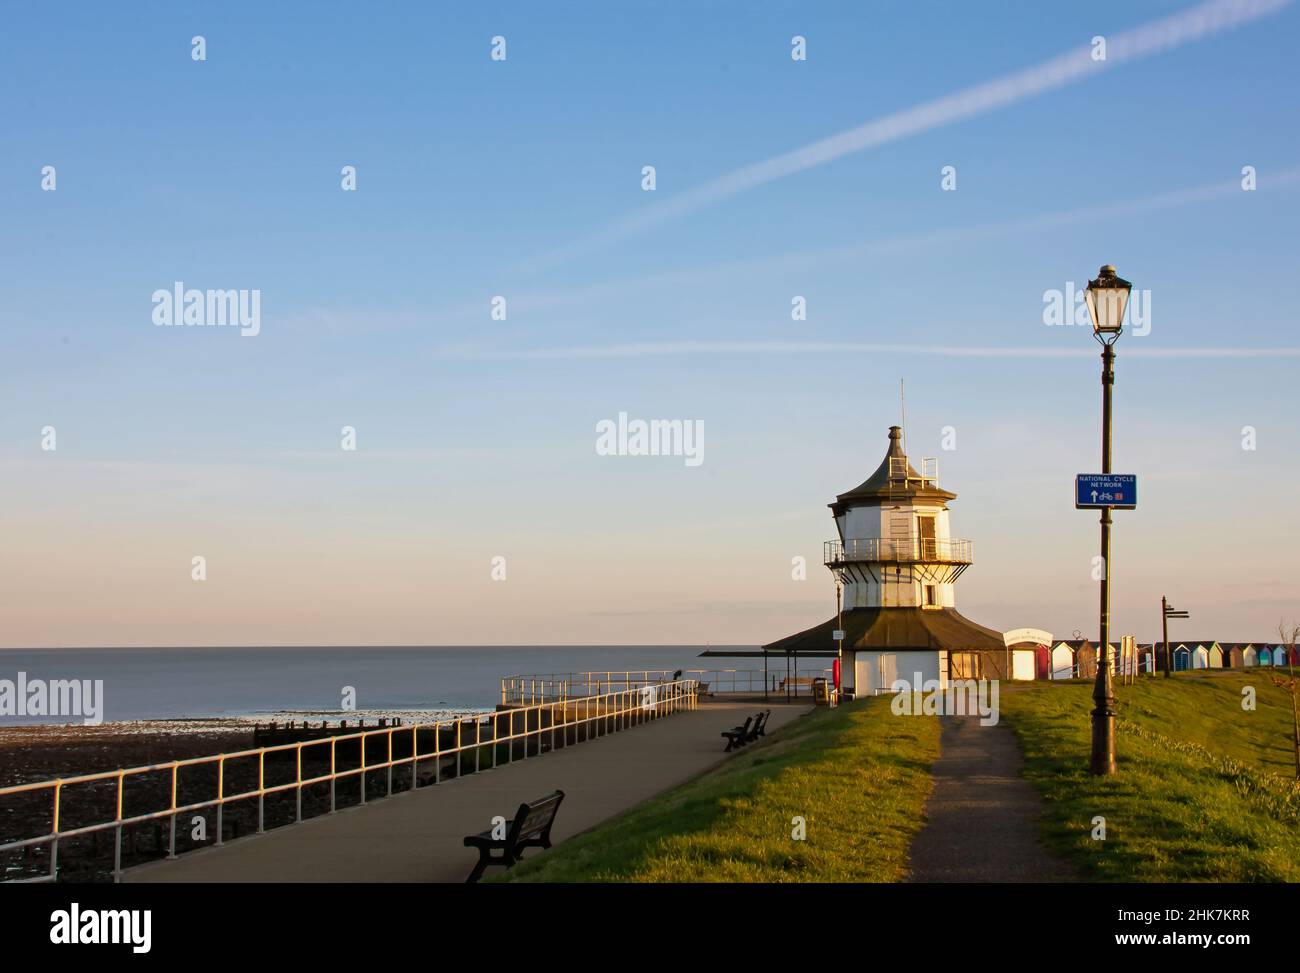 Harwich Low Lighthouse and Maritime Museum along the costal promenade at sunset in North Essex, England. Stock Photo